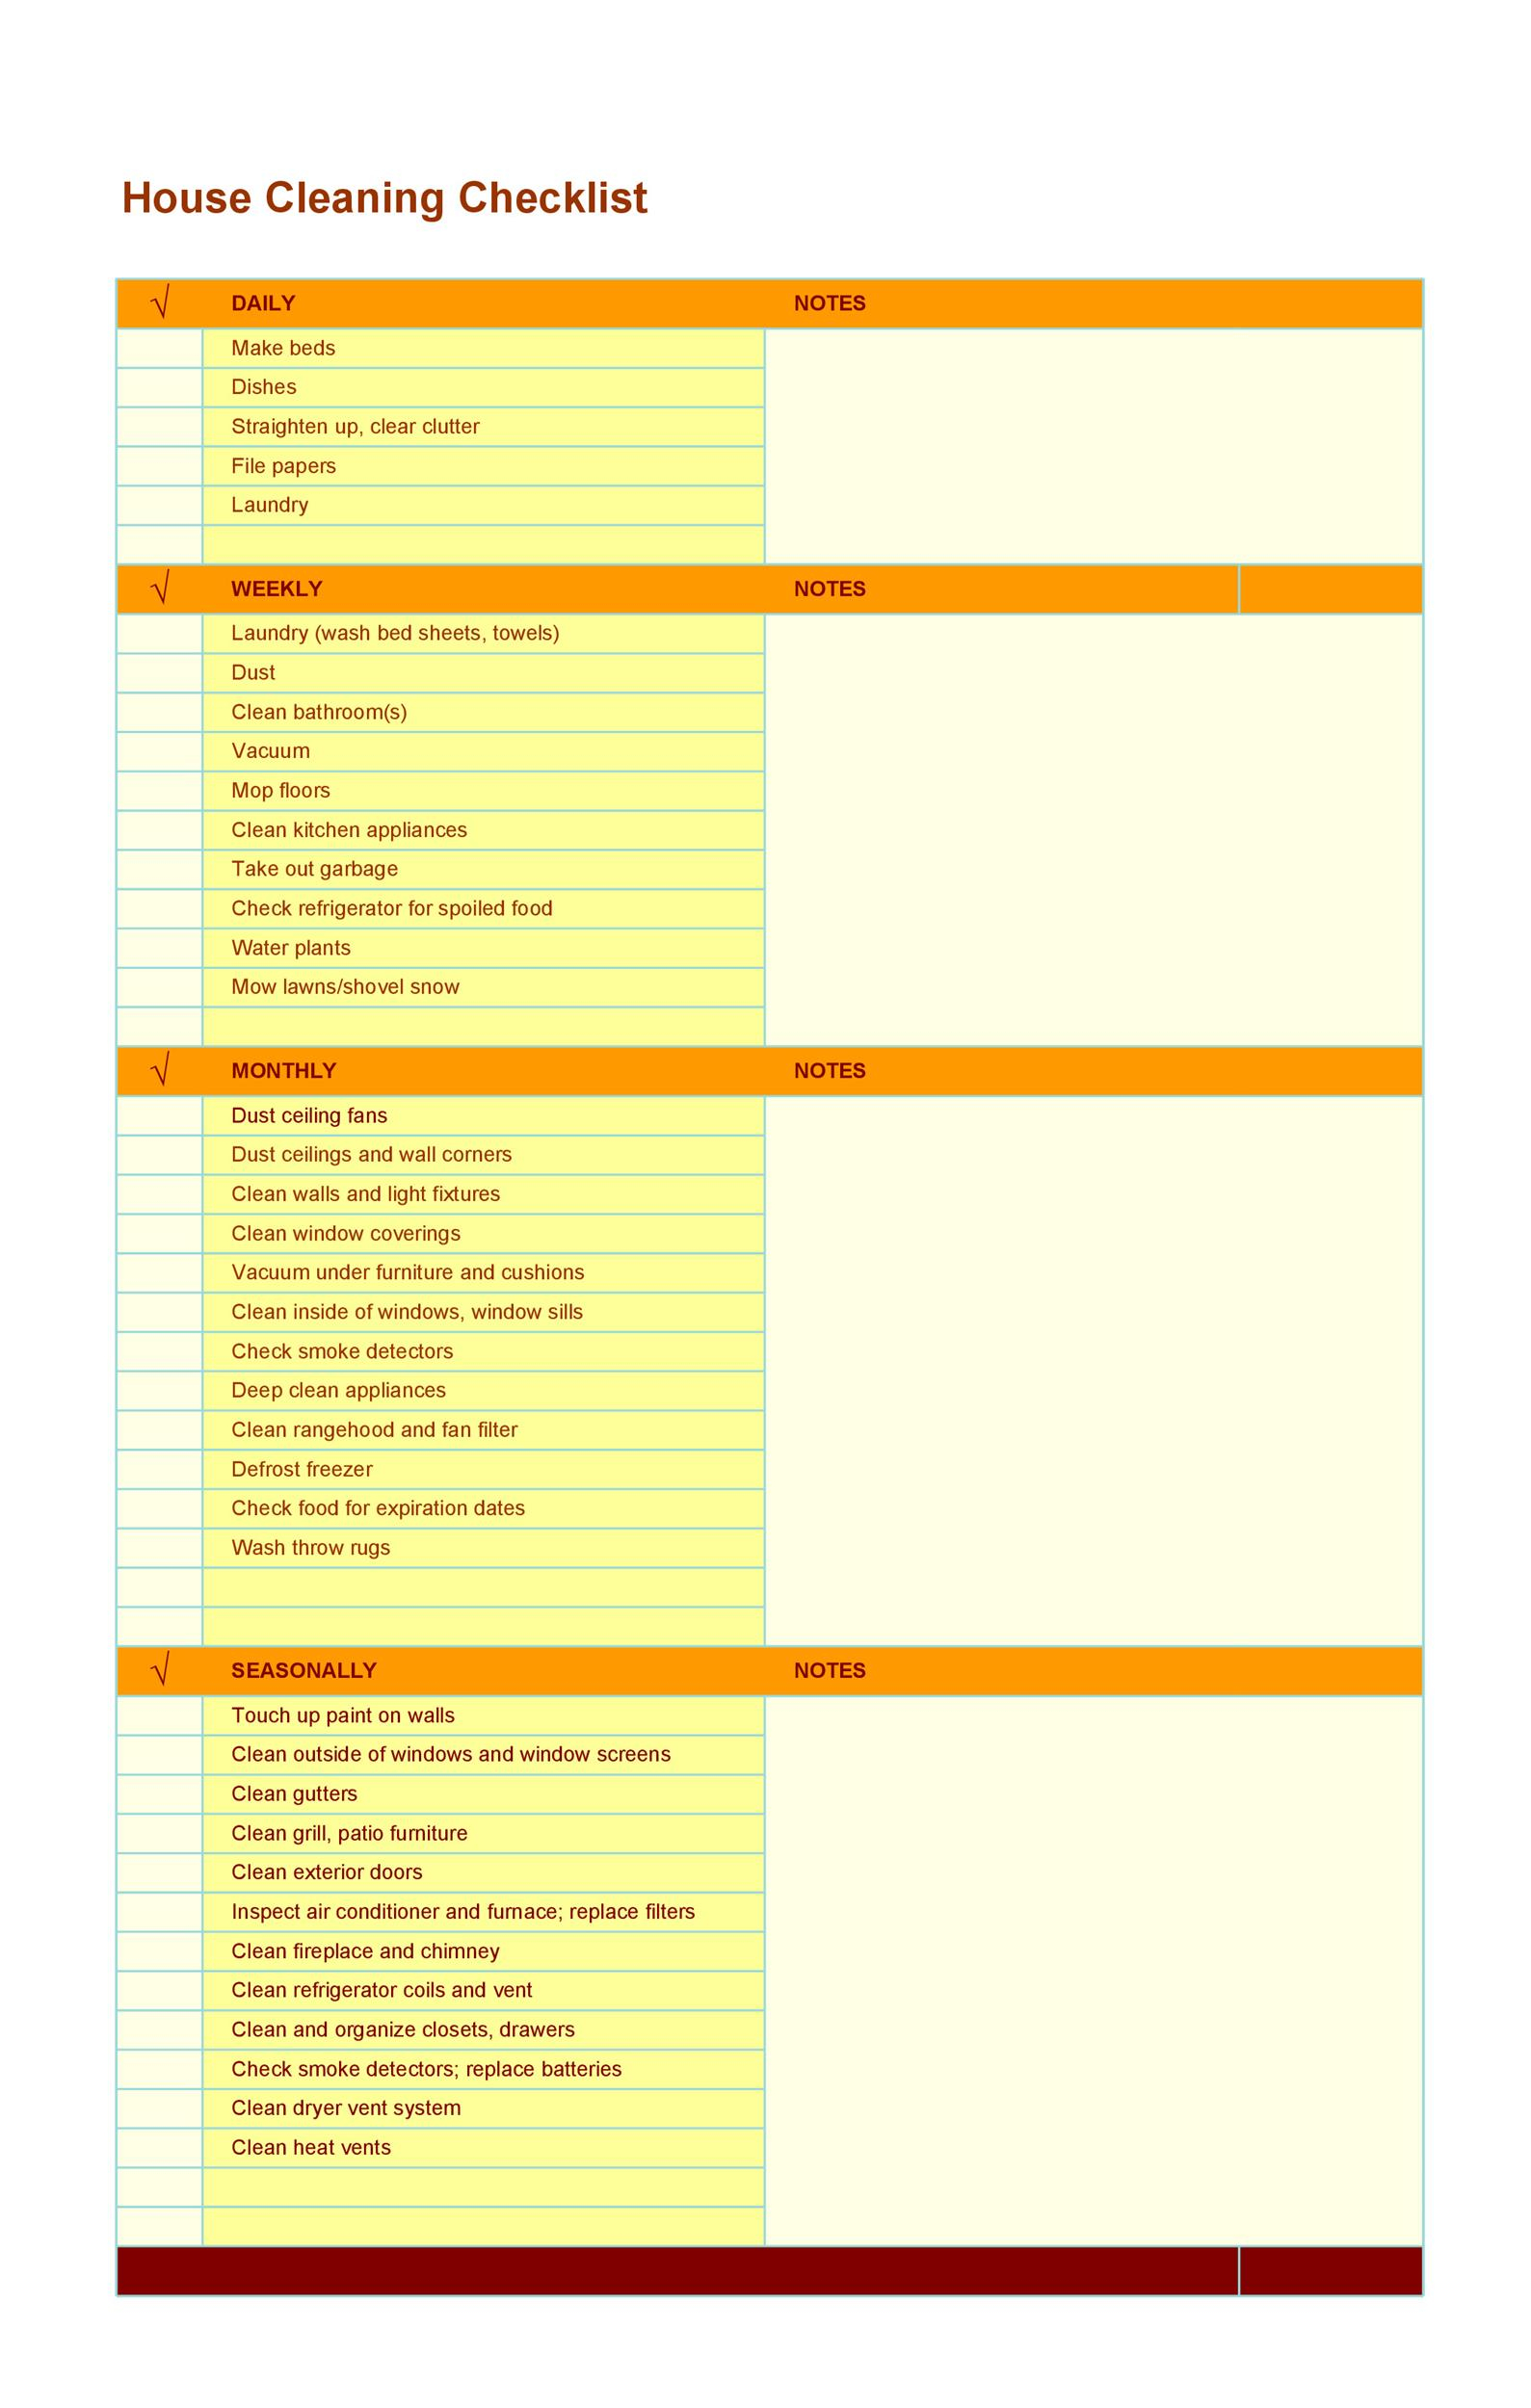 10 Printable House Cleaning Checklist Templates ᐅ TemplateLab Regarding Home Cleaning Checklist Template Regarding Home Cleaning Checklist Template